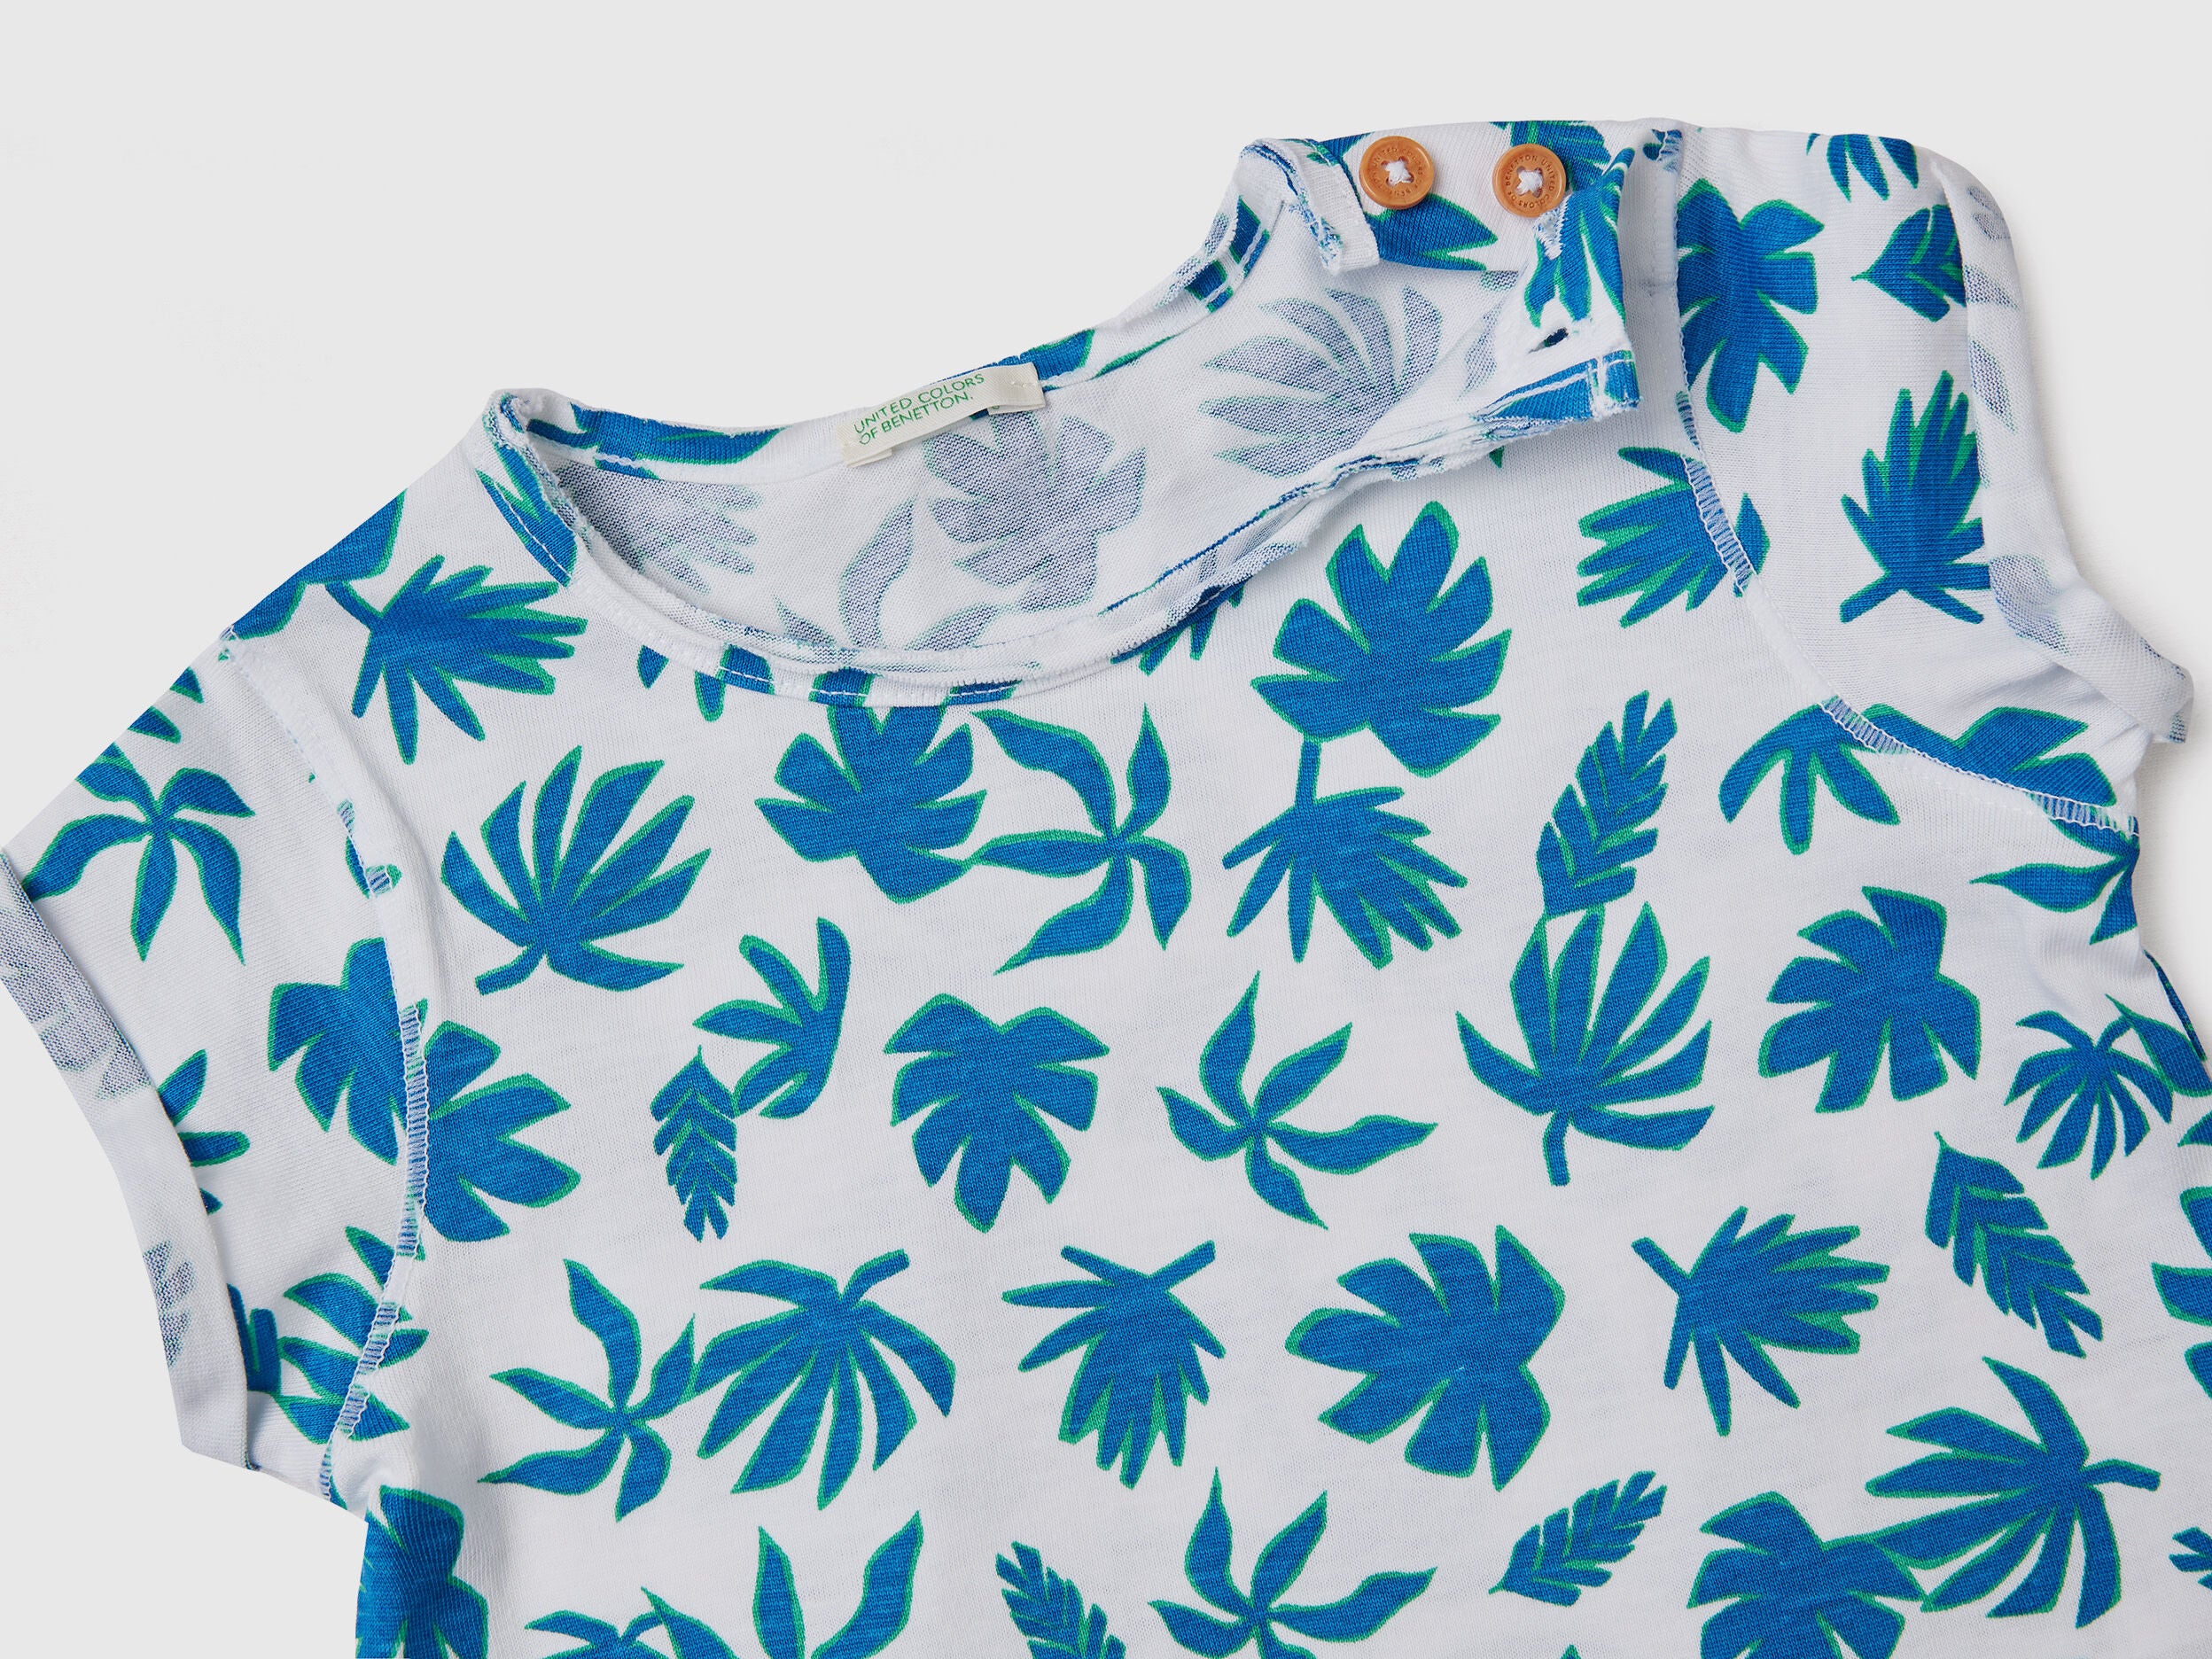 T-Shirt With Tropical Print